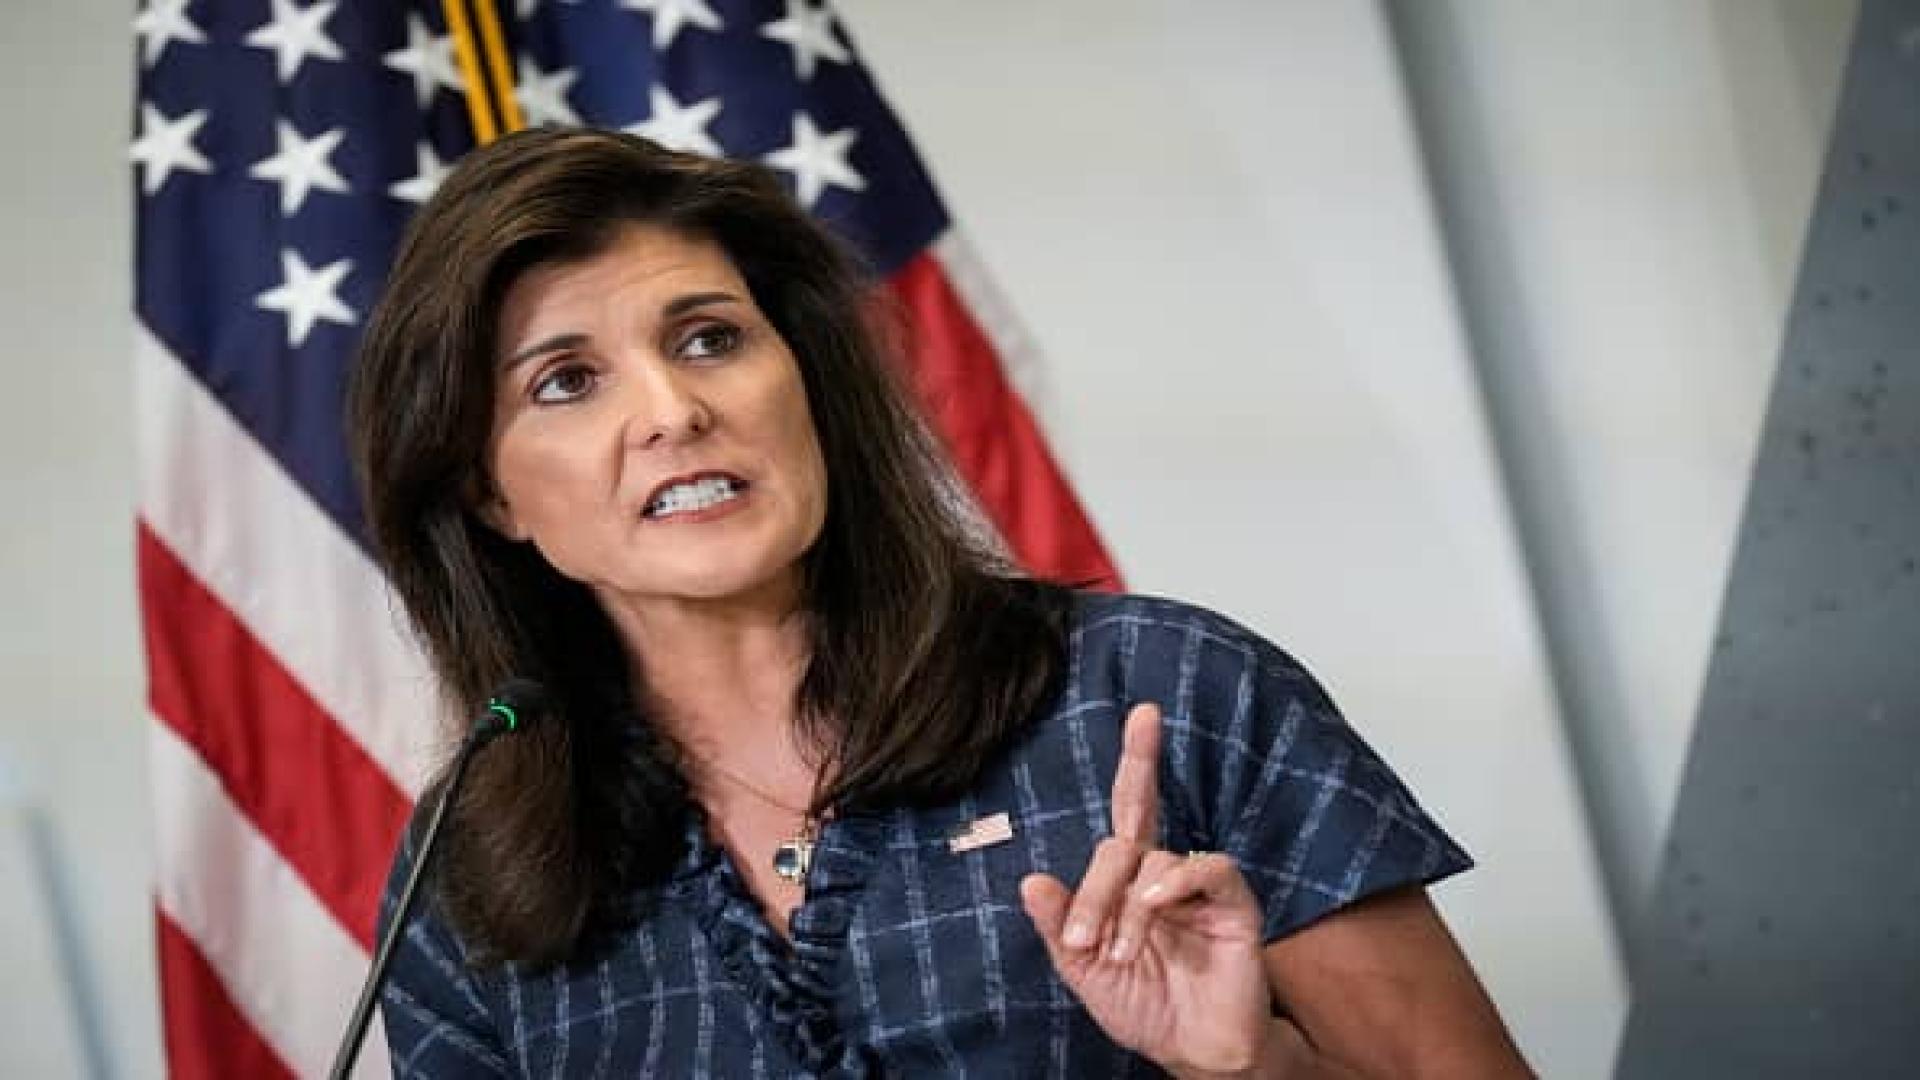 Nikki Haley: 'Every company needs to have a Plan B' on China